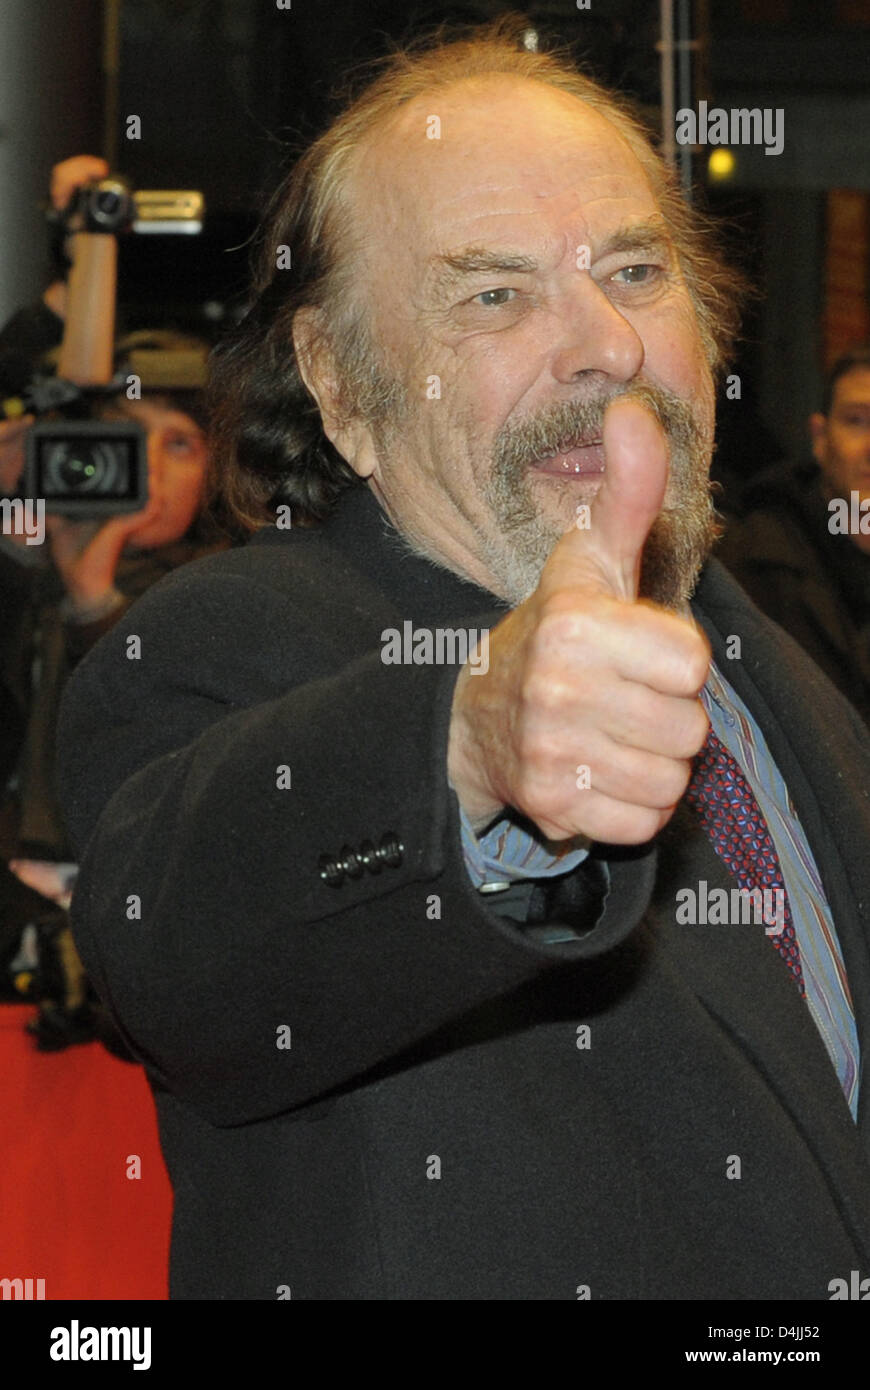 US-actor Rip Torn arrives for the premiere of the film ?Happy Tears? at the 59th Berlin International Film Festival in Berlin, Germany, 11 February 2009. The film is among the 18 films competing for the Silver and Golden Bear awards at the 59th Berlinale. Winners will be announced on 14 February. Photo: Soeren Stache Stock Photo